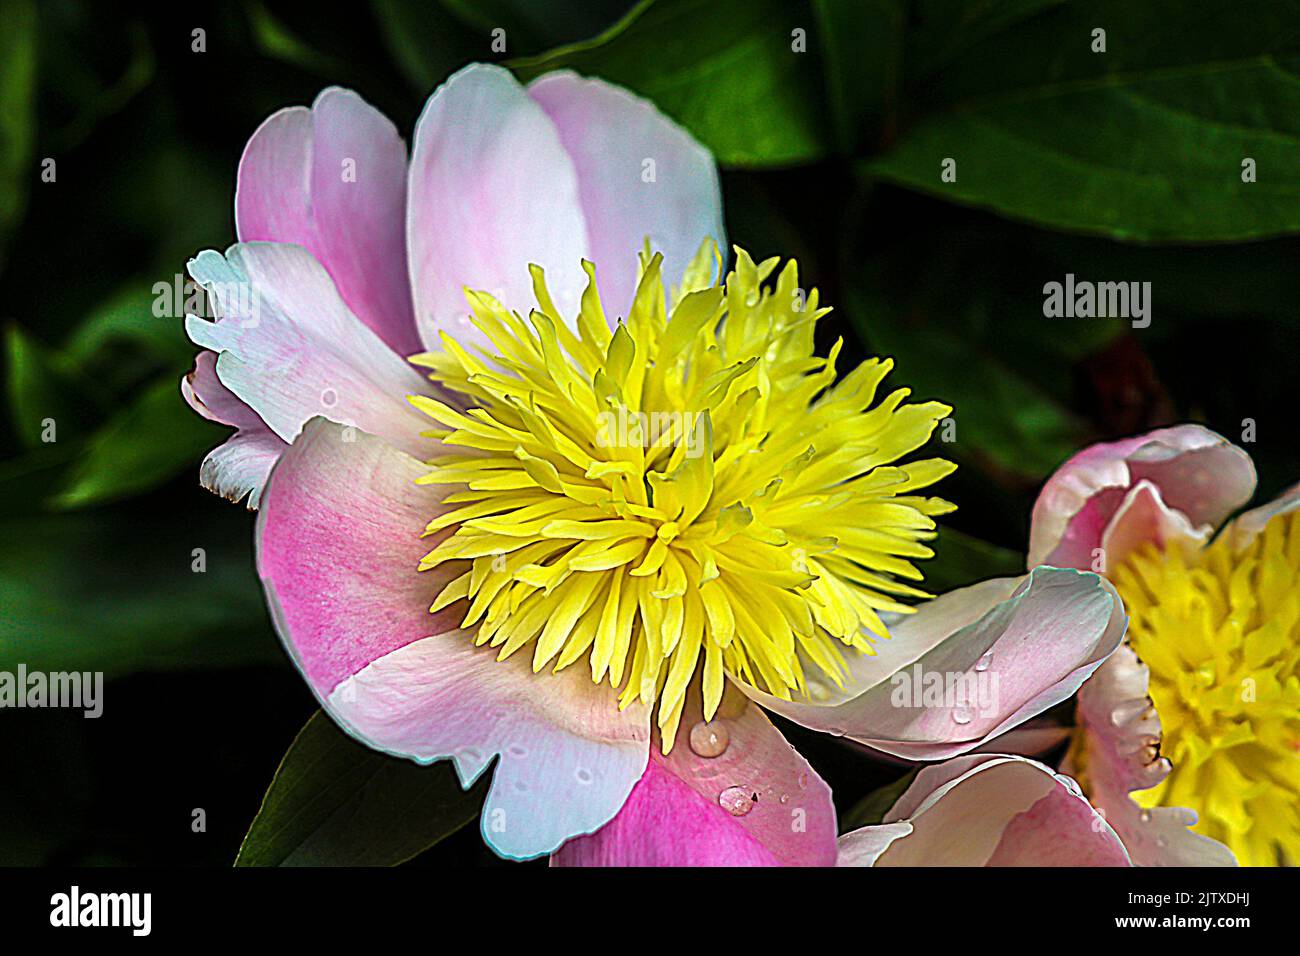 Pale pink peony (Paeonia) with long yellow centers at Butchart Gardens located in Brentwood Bay, British Columbia, Canada. Stock Photo